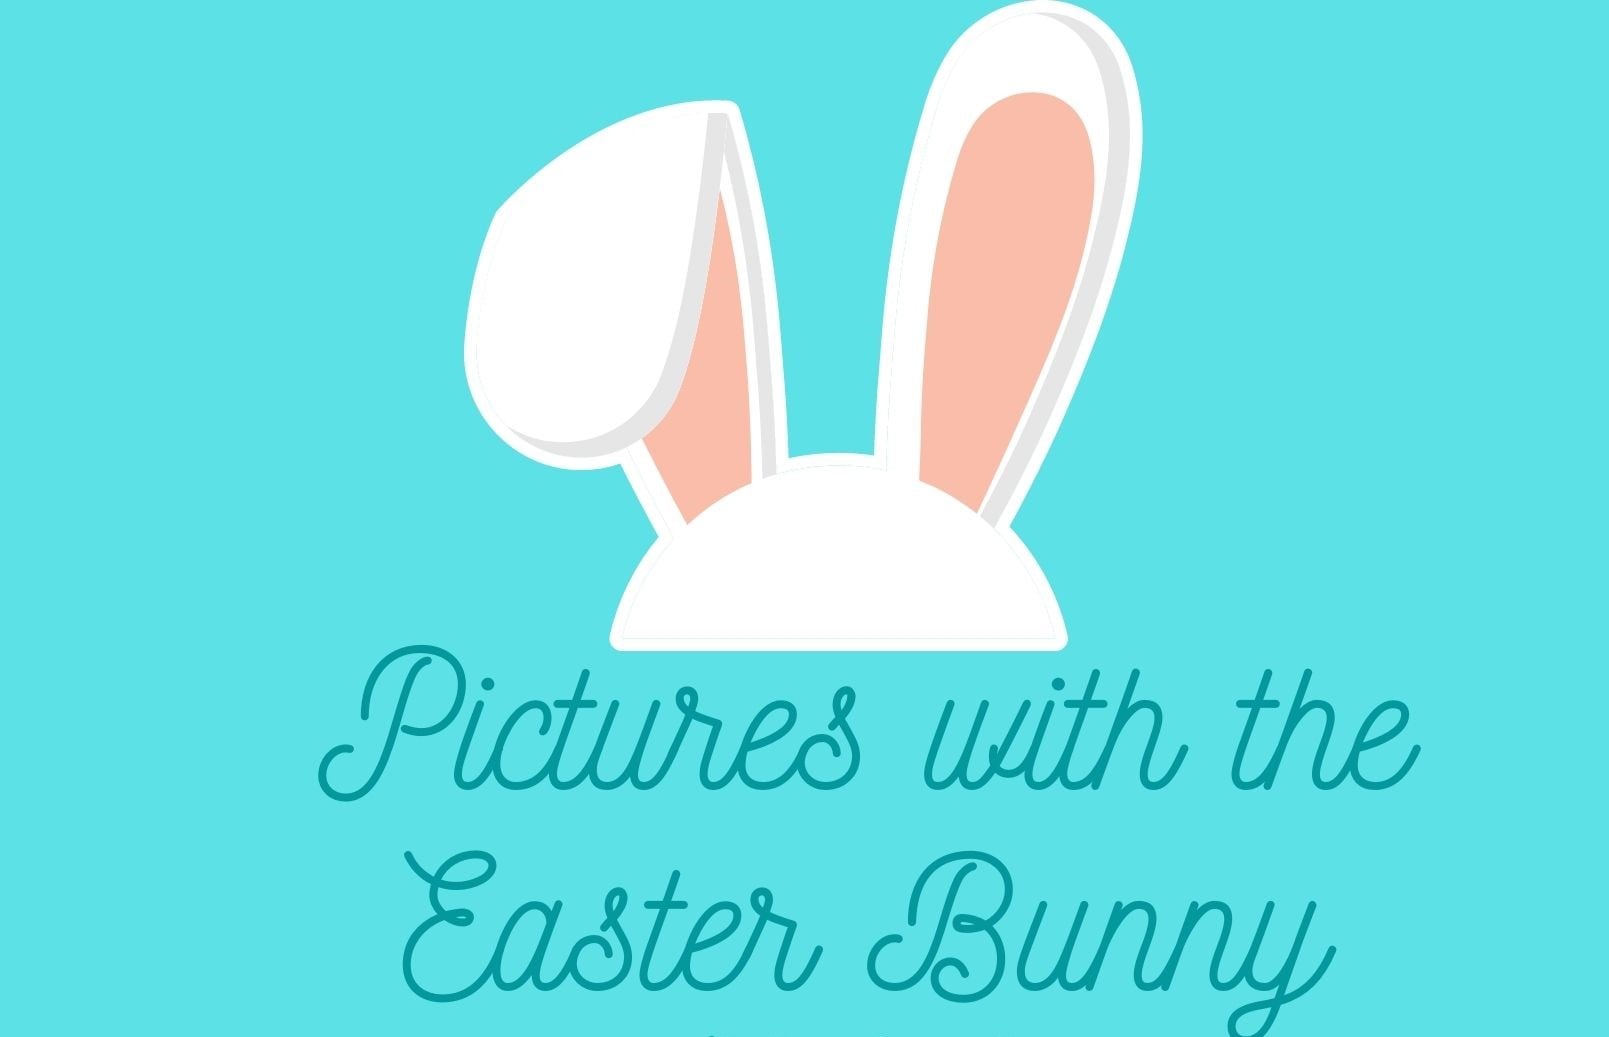 Hawthorn to host Easter Bunny for photo opportunities